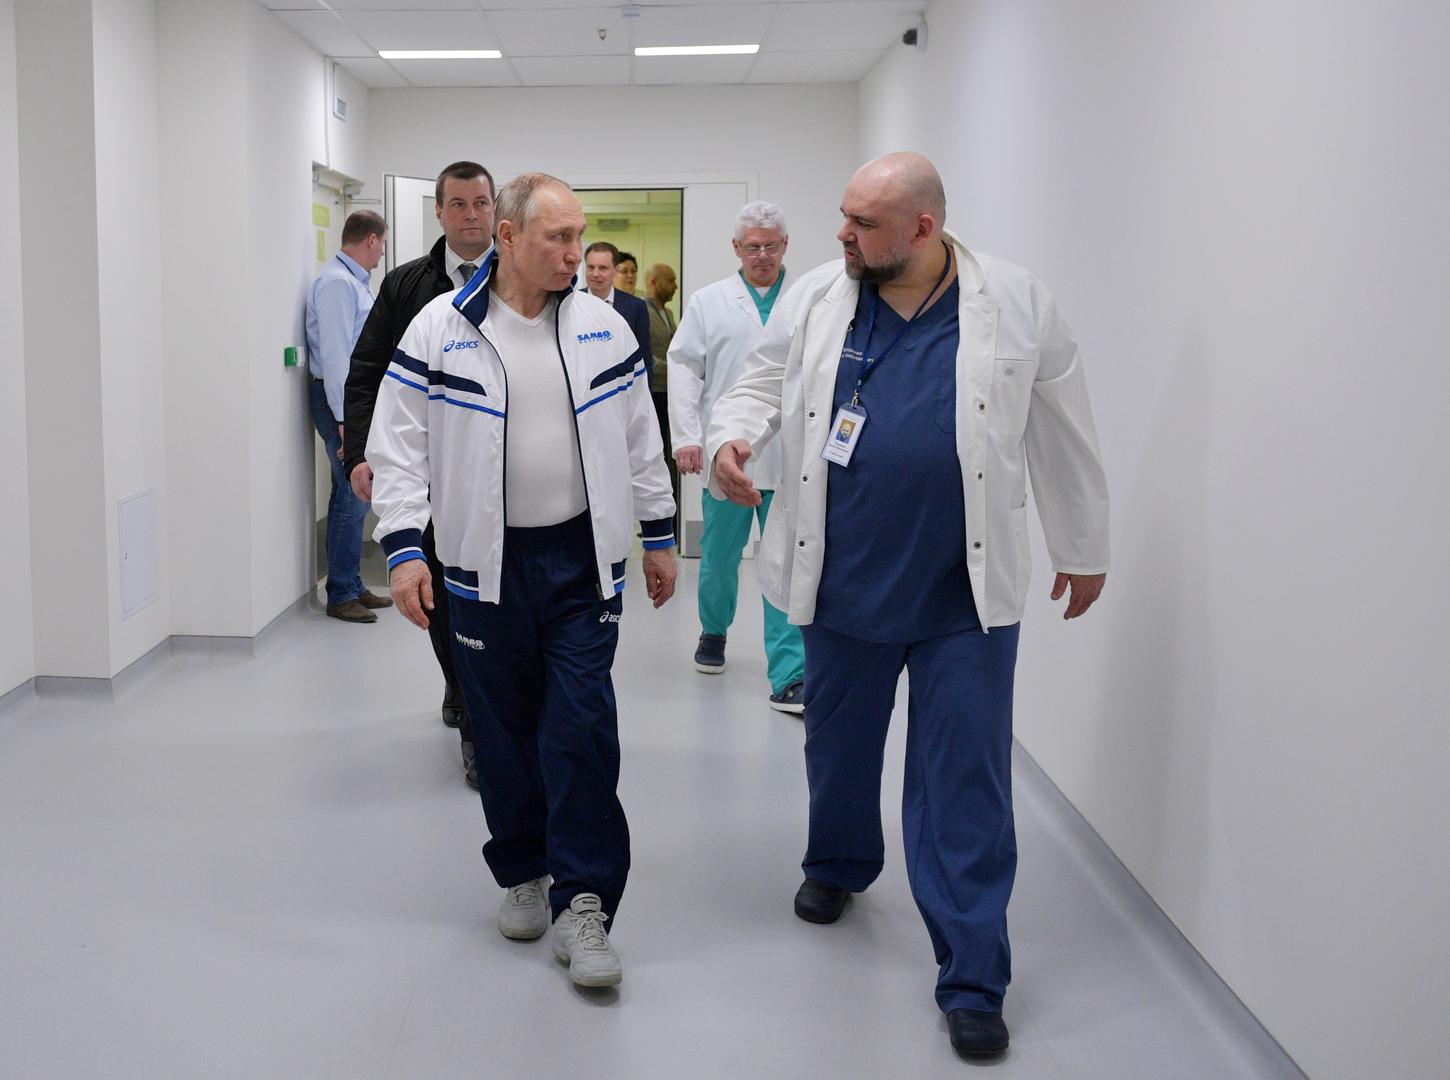 Russian President Putin visits a hospital for patients infected with coronavirus disease (COVID-19) on the outskirts of Moscow Russian President Vladimir Putin listens to Denis Protsenko, chief physician of a hospital for patients infected with coronavirus disease (COVID-19), as they walk at the hospital, on the outskirts of Moscow, Russia March 24, 2020. Sputnik/Alexey Druzhinin/Kremlin via REUTERS ATTENTION EDITORS - THIS IMAGE WAS PROVIDED BY A THIRD PARTY. SPUTNIK